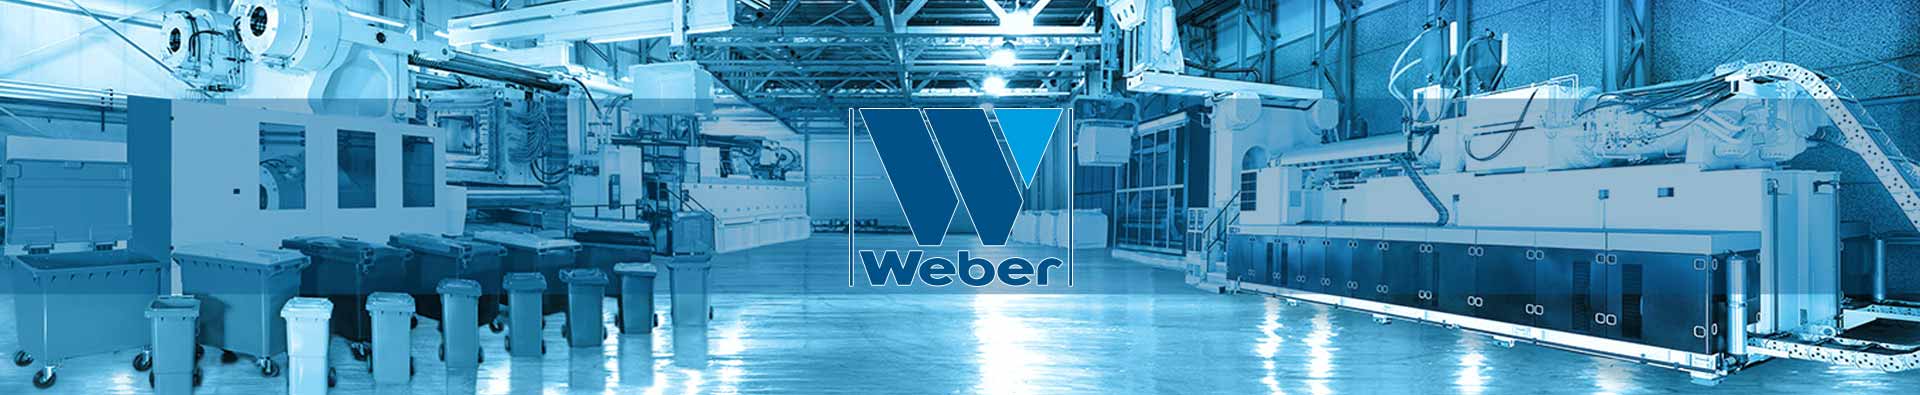 manufacturing facility from waste containers producer Weber